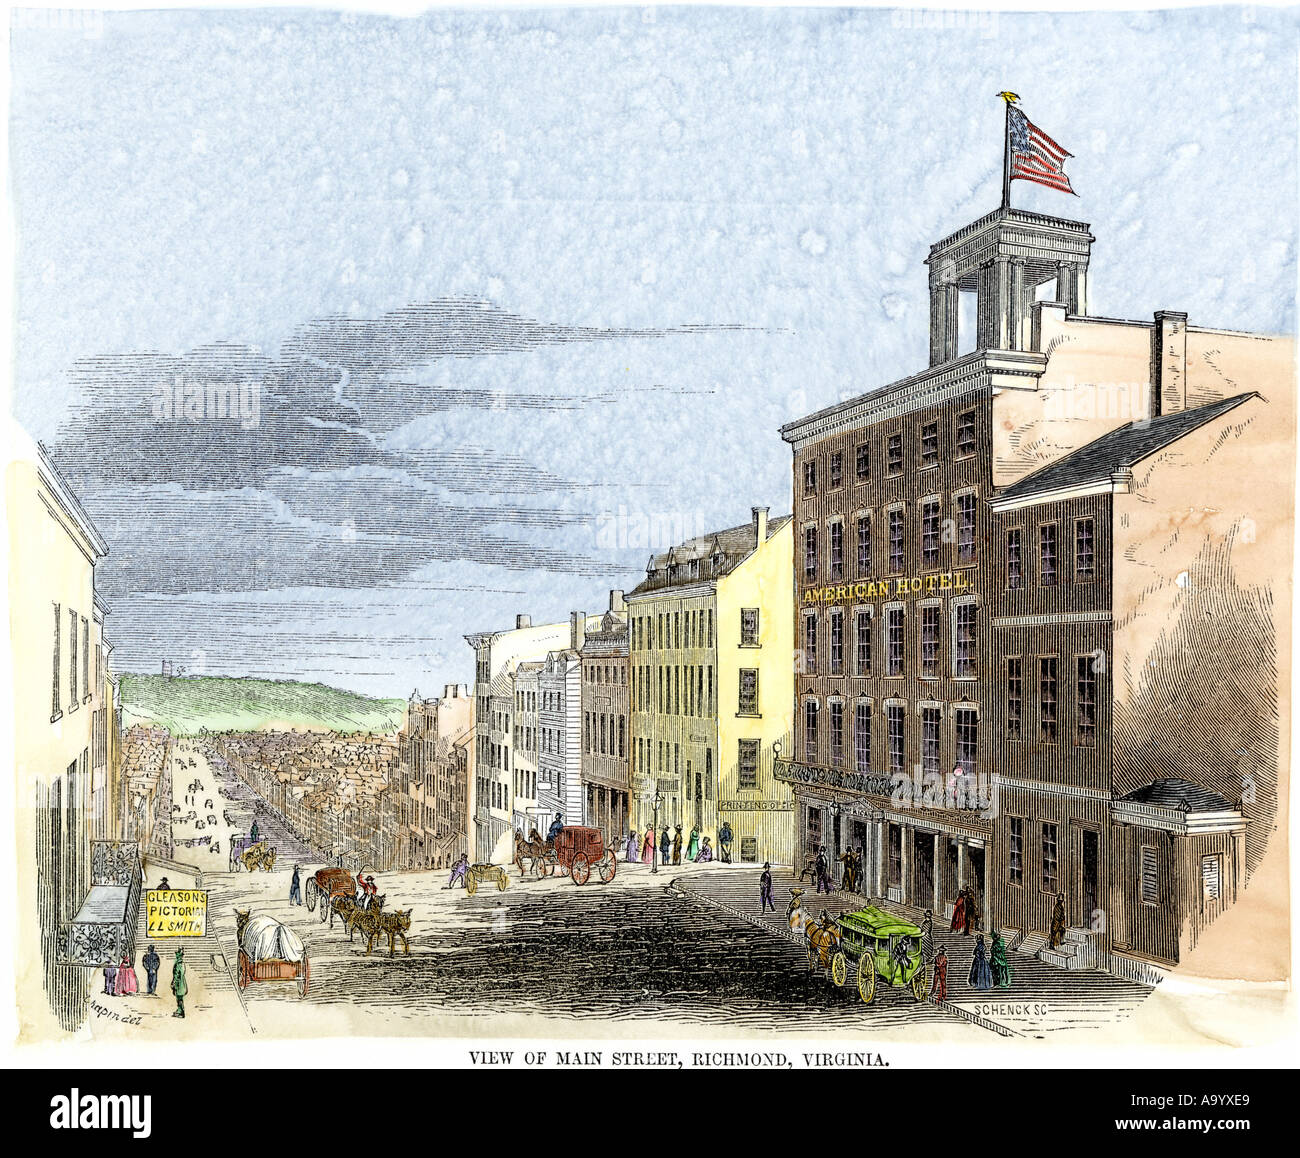 Main Street in Richmond Virginia before the Civil War 1850s. Hand-colored woodcut Stock Photo